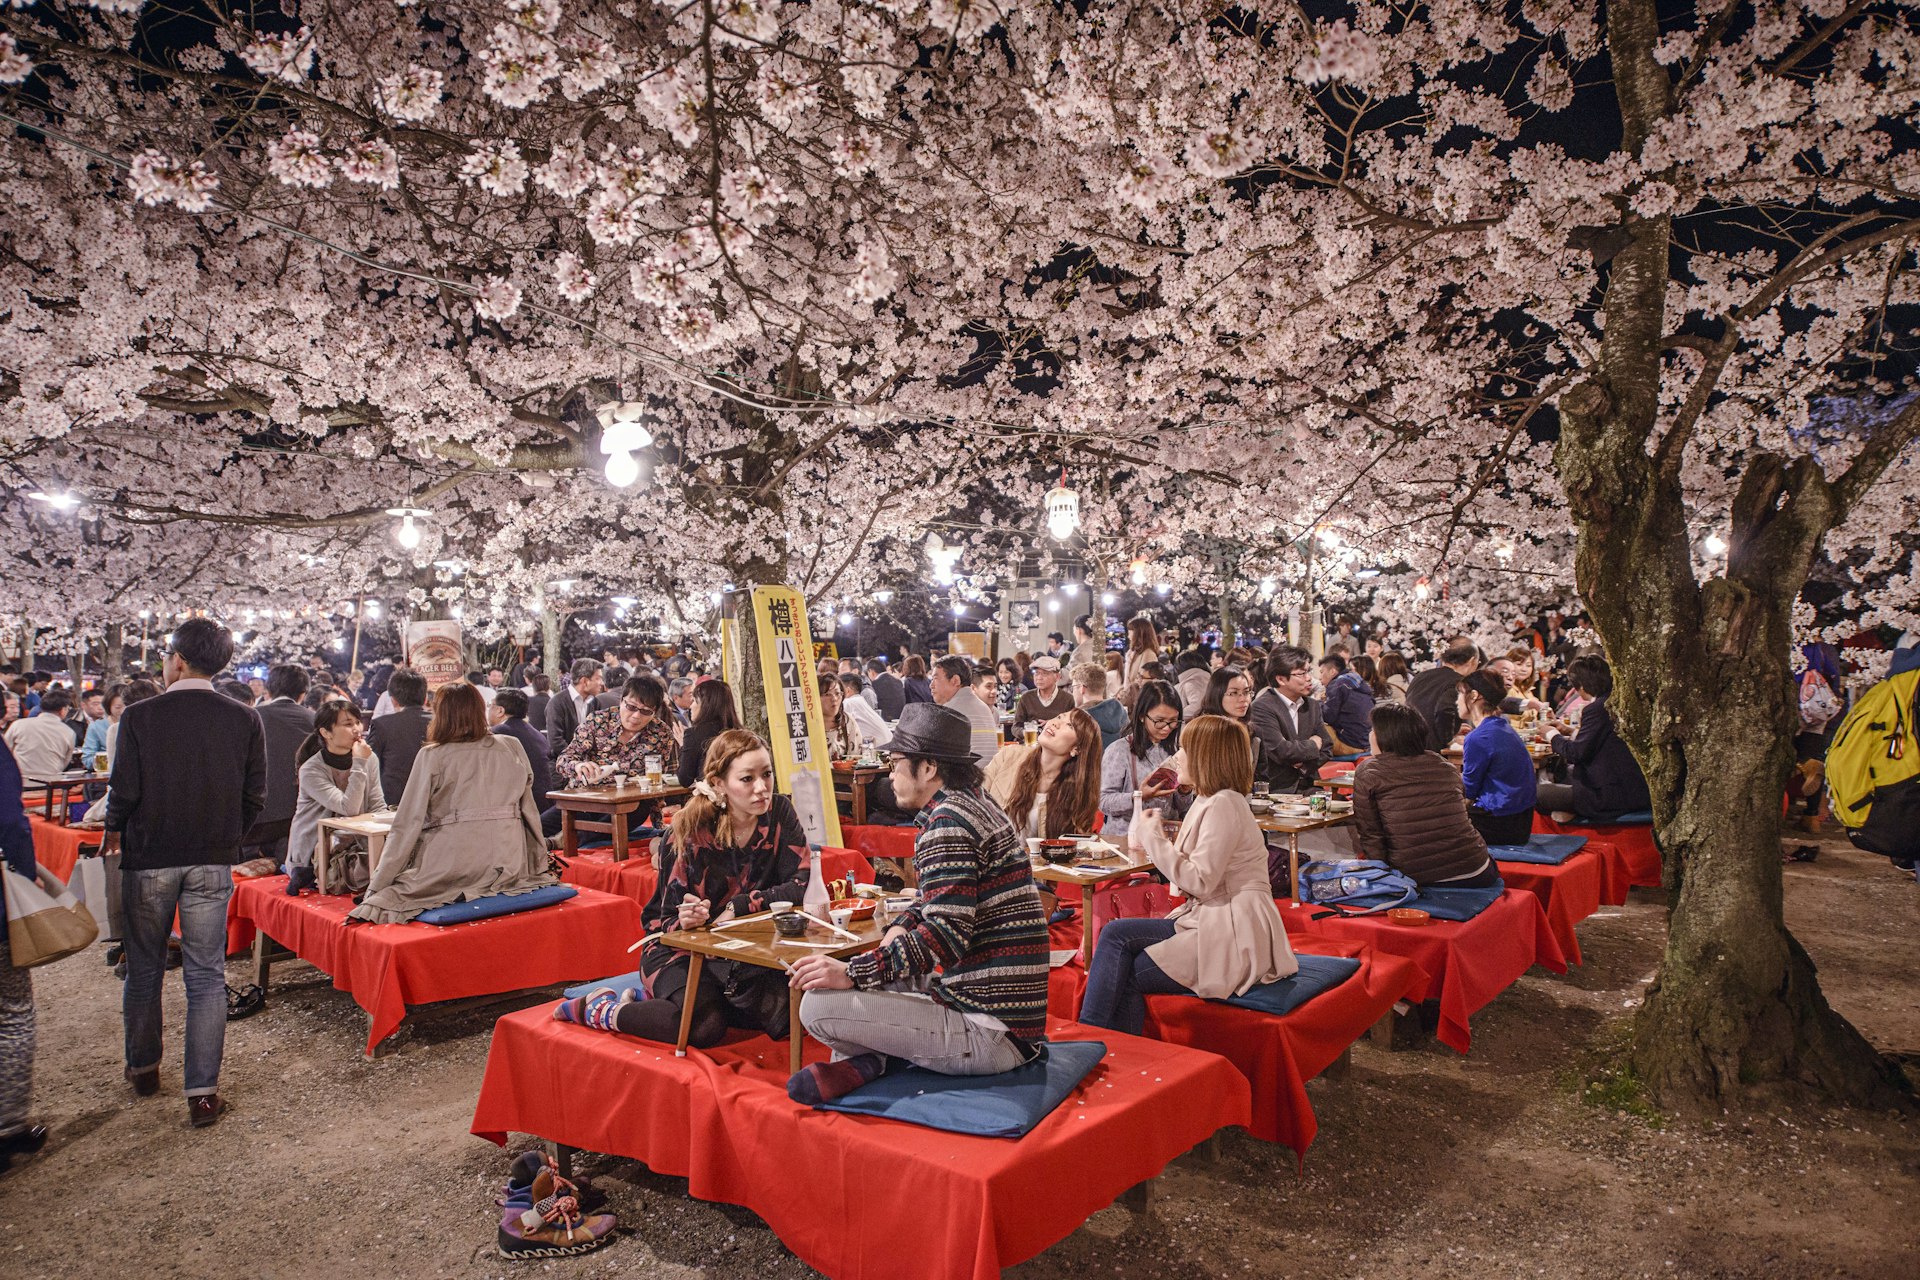 Crowds enjoy the spring cherry blossoms in Kyoto